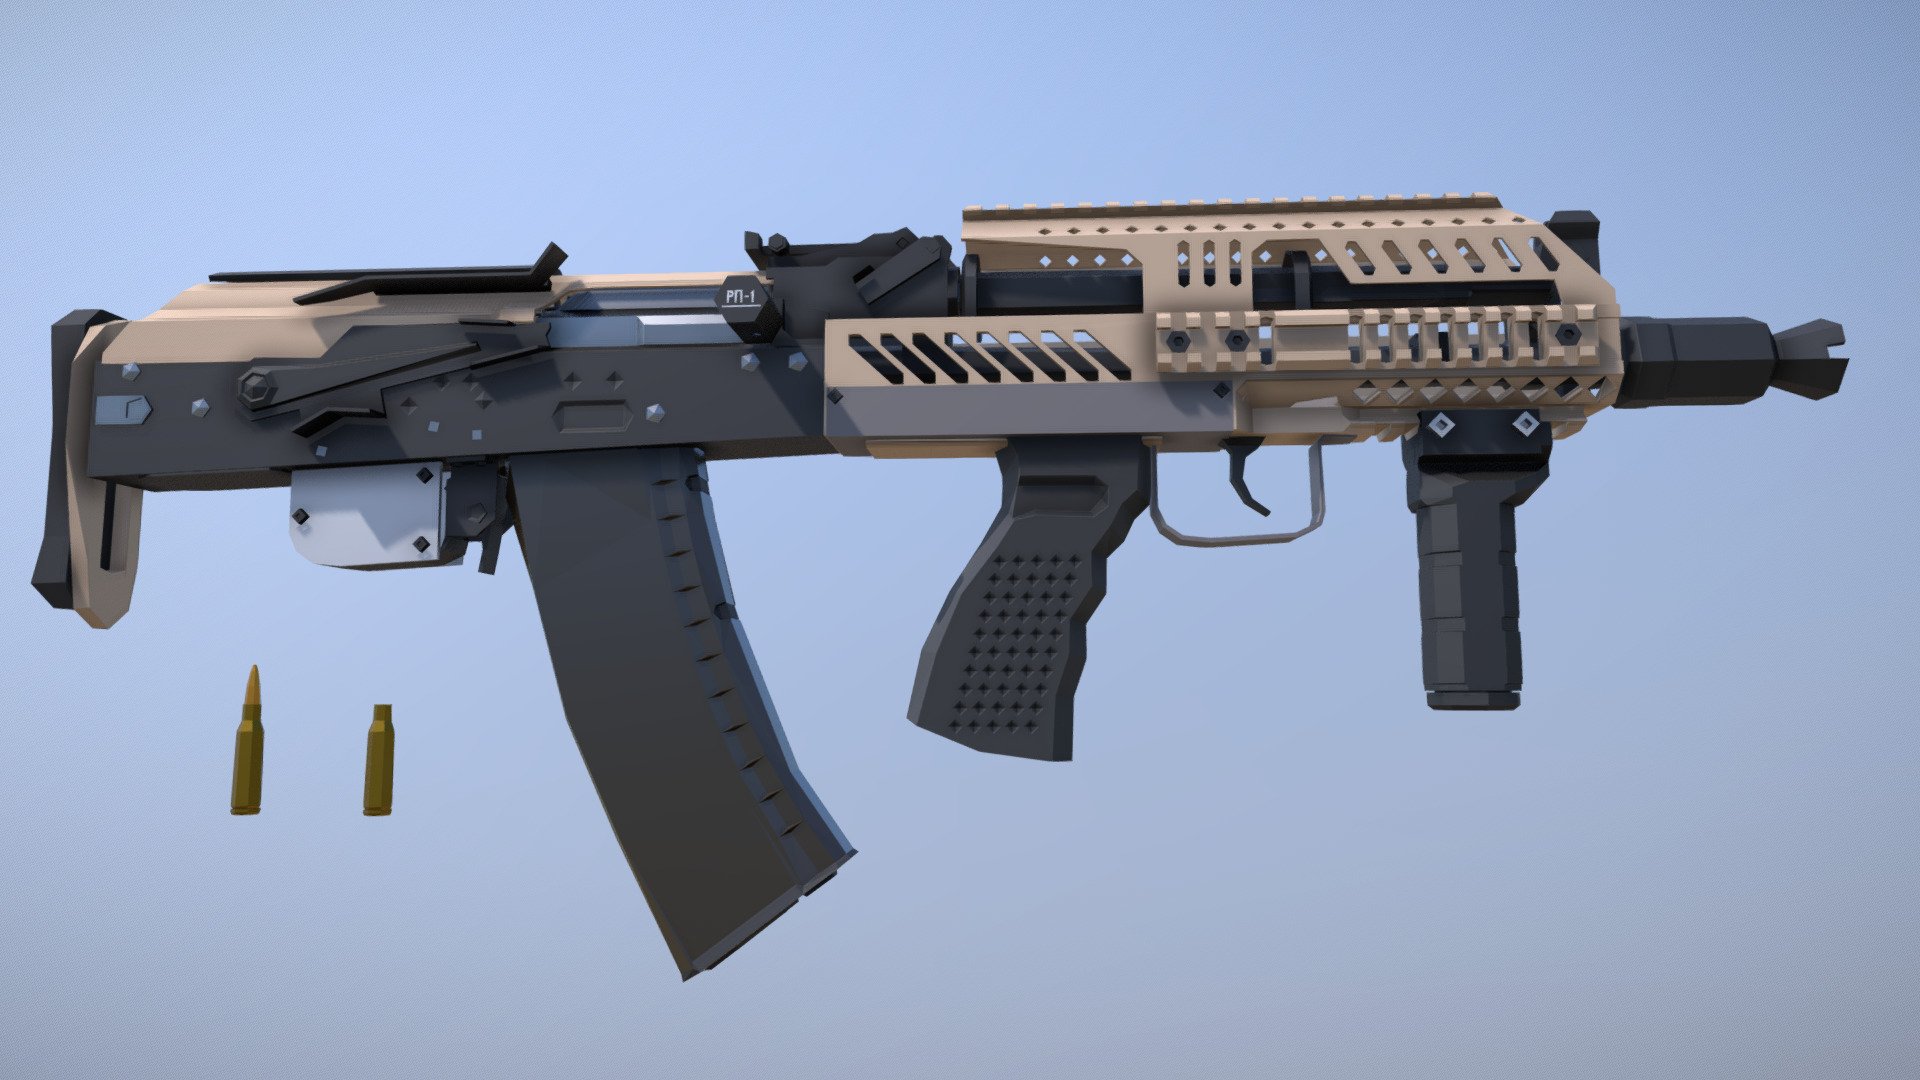 Low-Poly model of an AK-105 converted into a bullpup using a Kochevnik bullpup kit, made by Zenitco in cooperation with a gun designer who's nickname gave the kit its name. This gun is significantly shorter than even the AKS-74U, while still having a longer barrel and all the features of a normal AK, as well as a rail for mounting optics. It has a brass deflector and a cheekpad on the dust cover, as well as a heatshield above the pistol grip 3d model